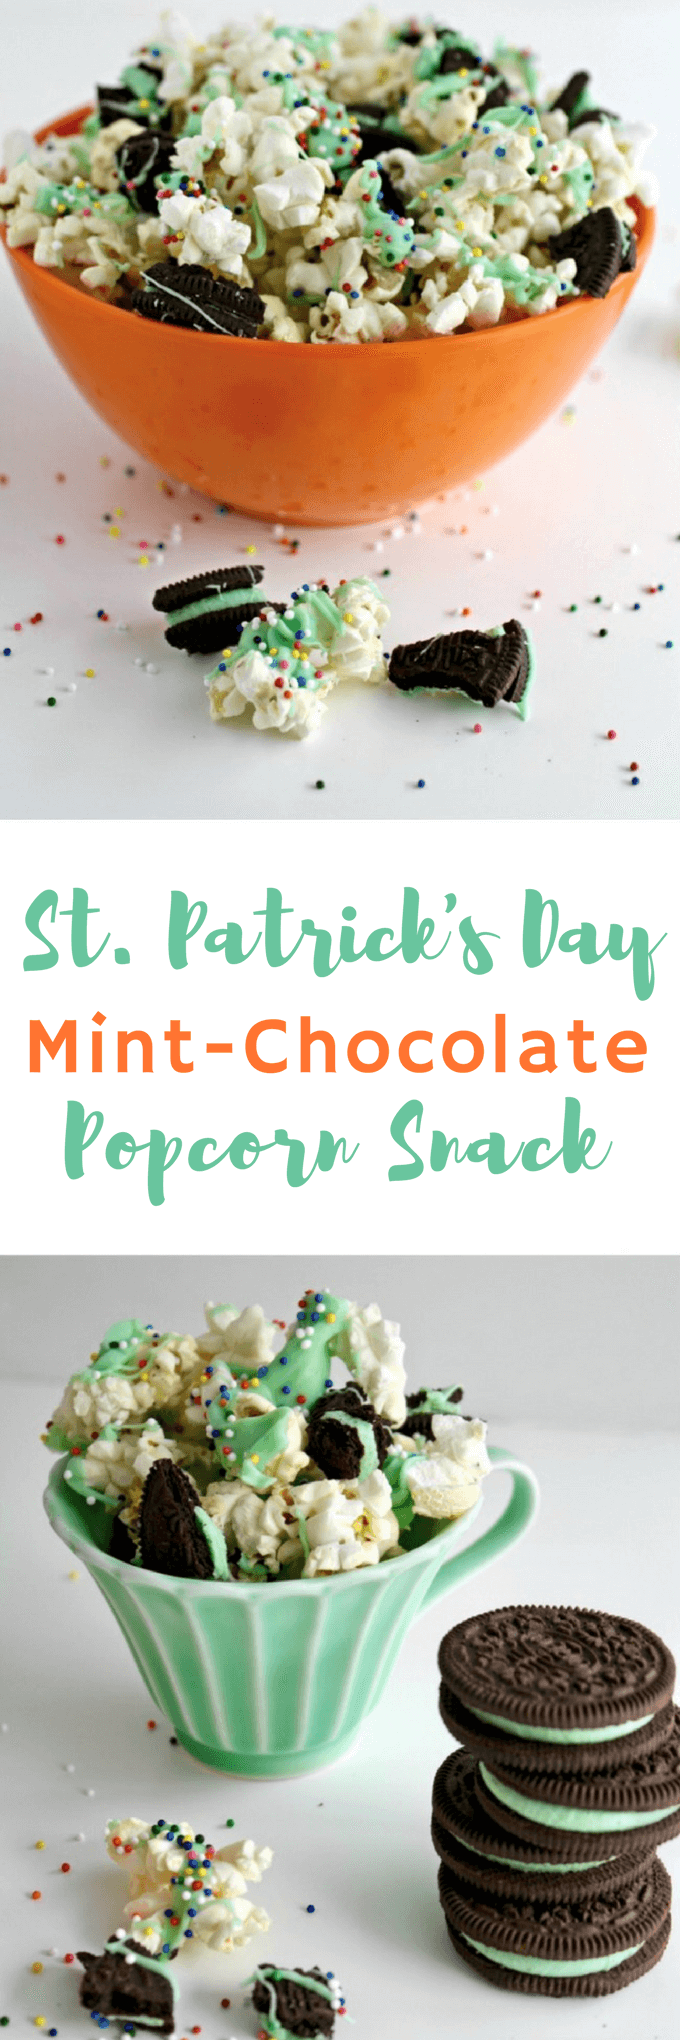 St. Patrick's Day Mint-Chocolate Popcorn Snack adds some cheer to the day! Make a batch to celebrate!